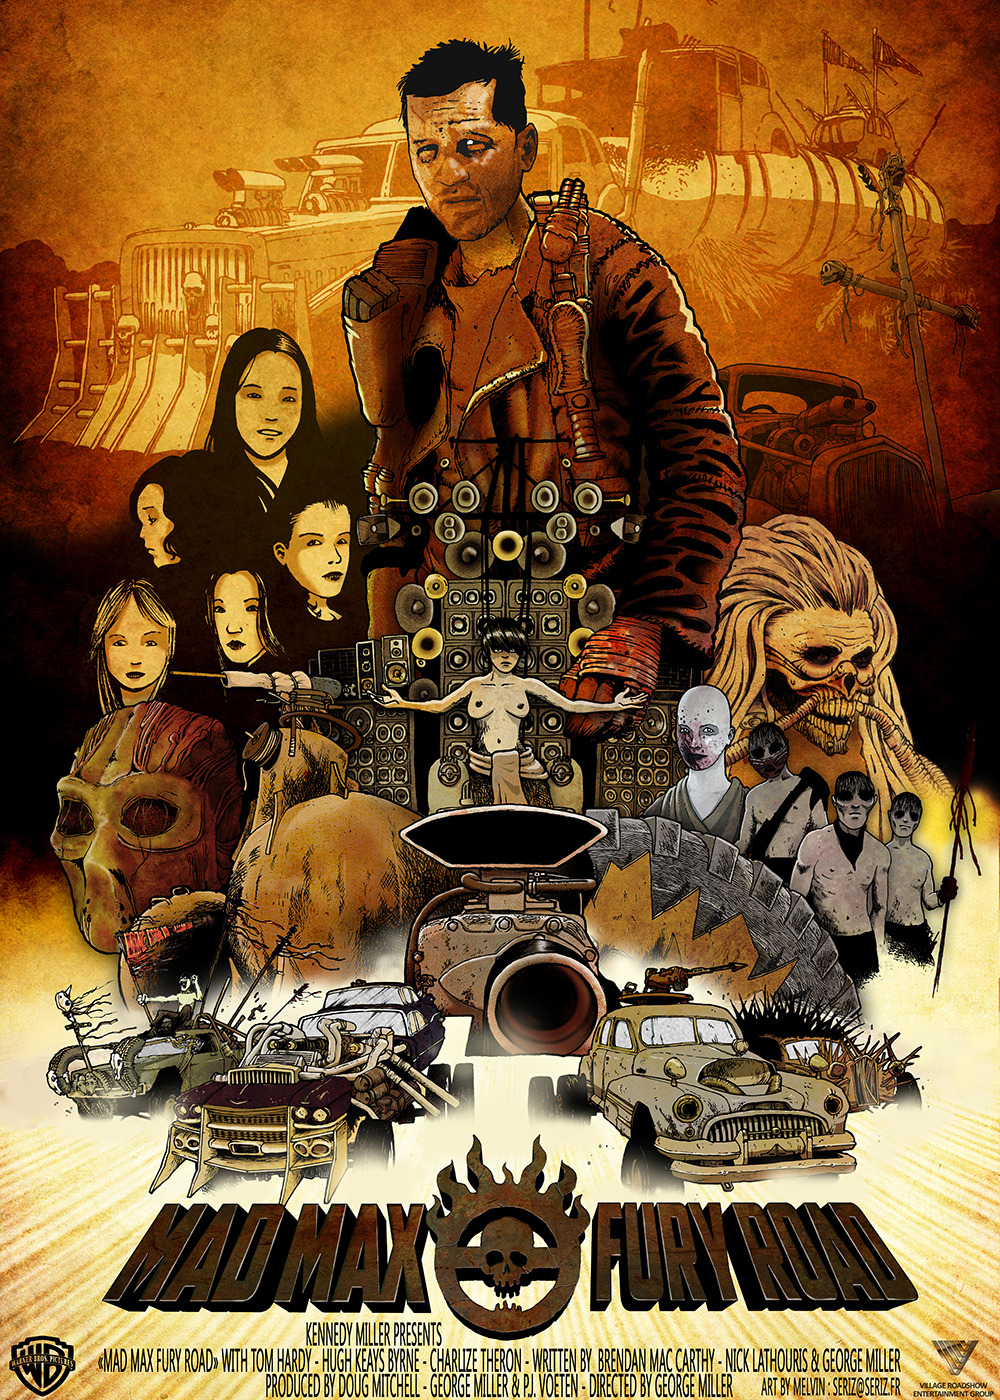 www.madmaxmovies.com • View topic - Collection of Mad Max Art